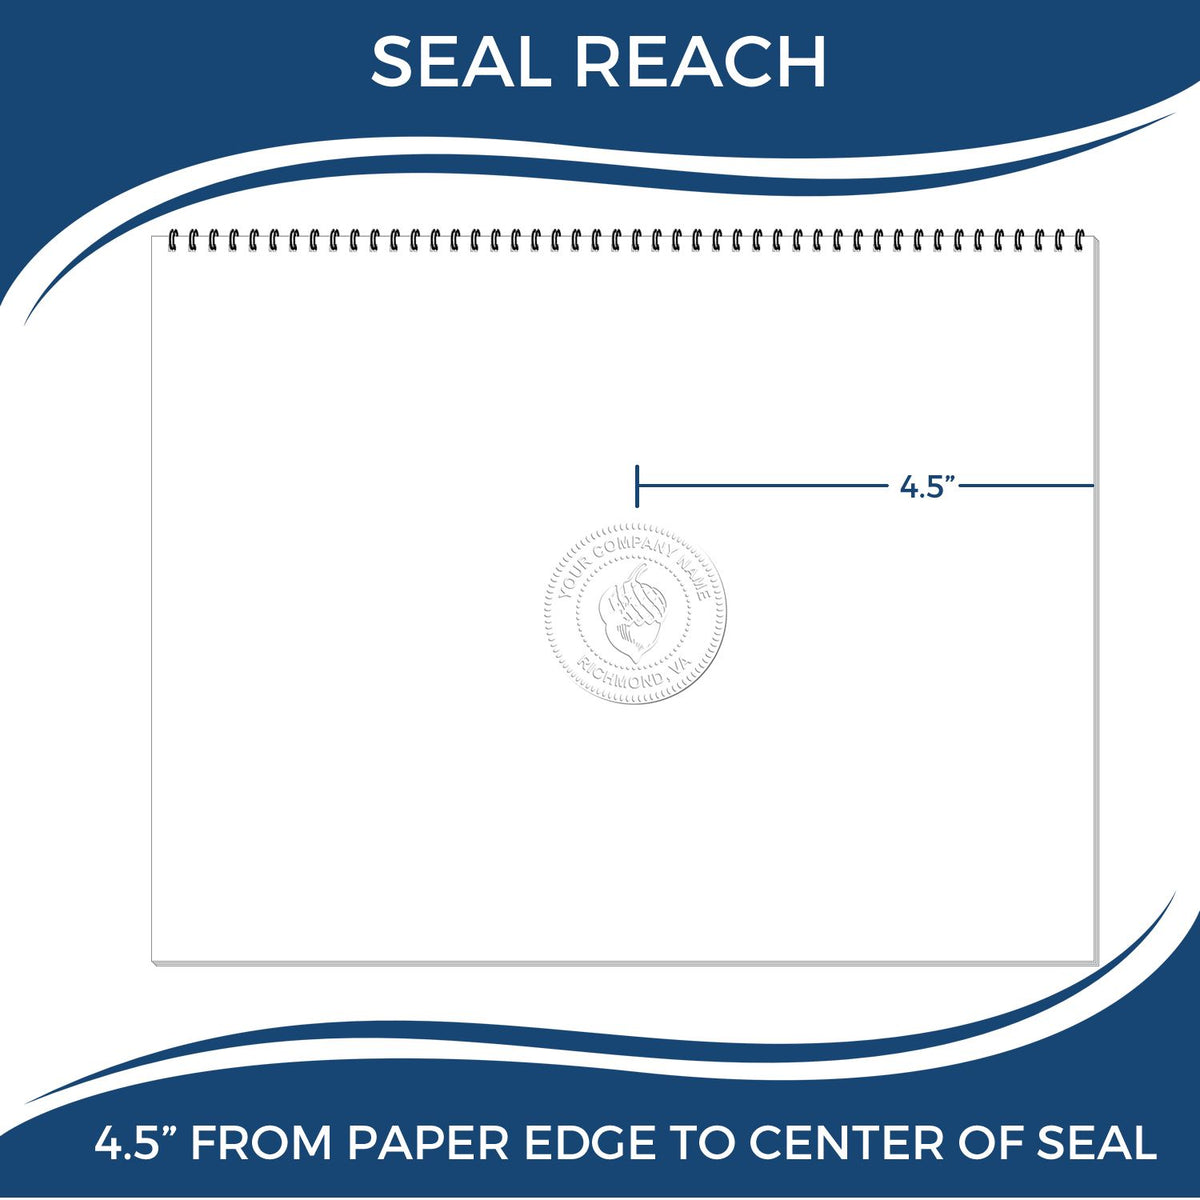 An infographic showing the seal reach which is represented by a ruler and a miniature seal image of the State of New Jersey Extended Long Reach Engineer Seal